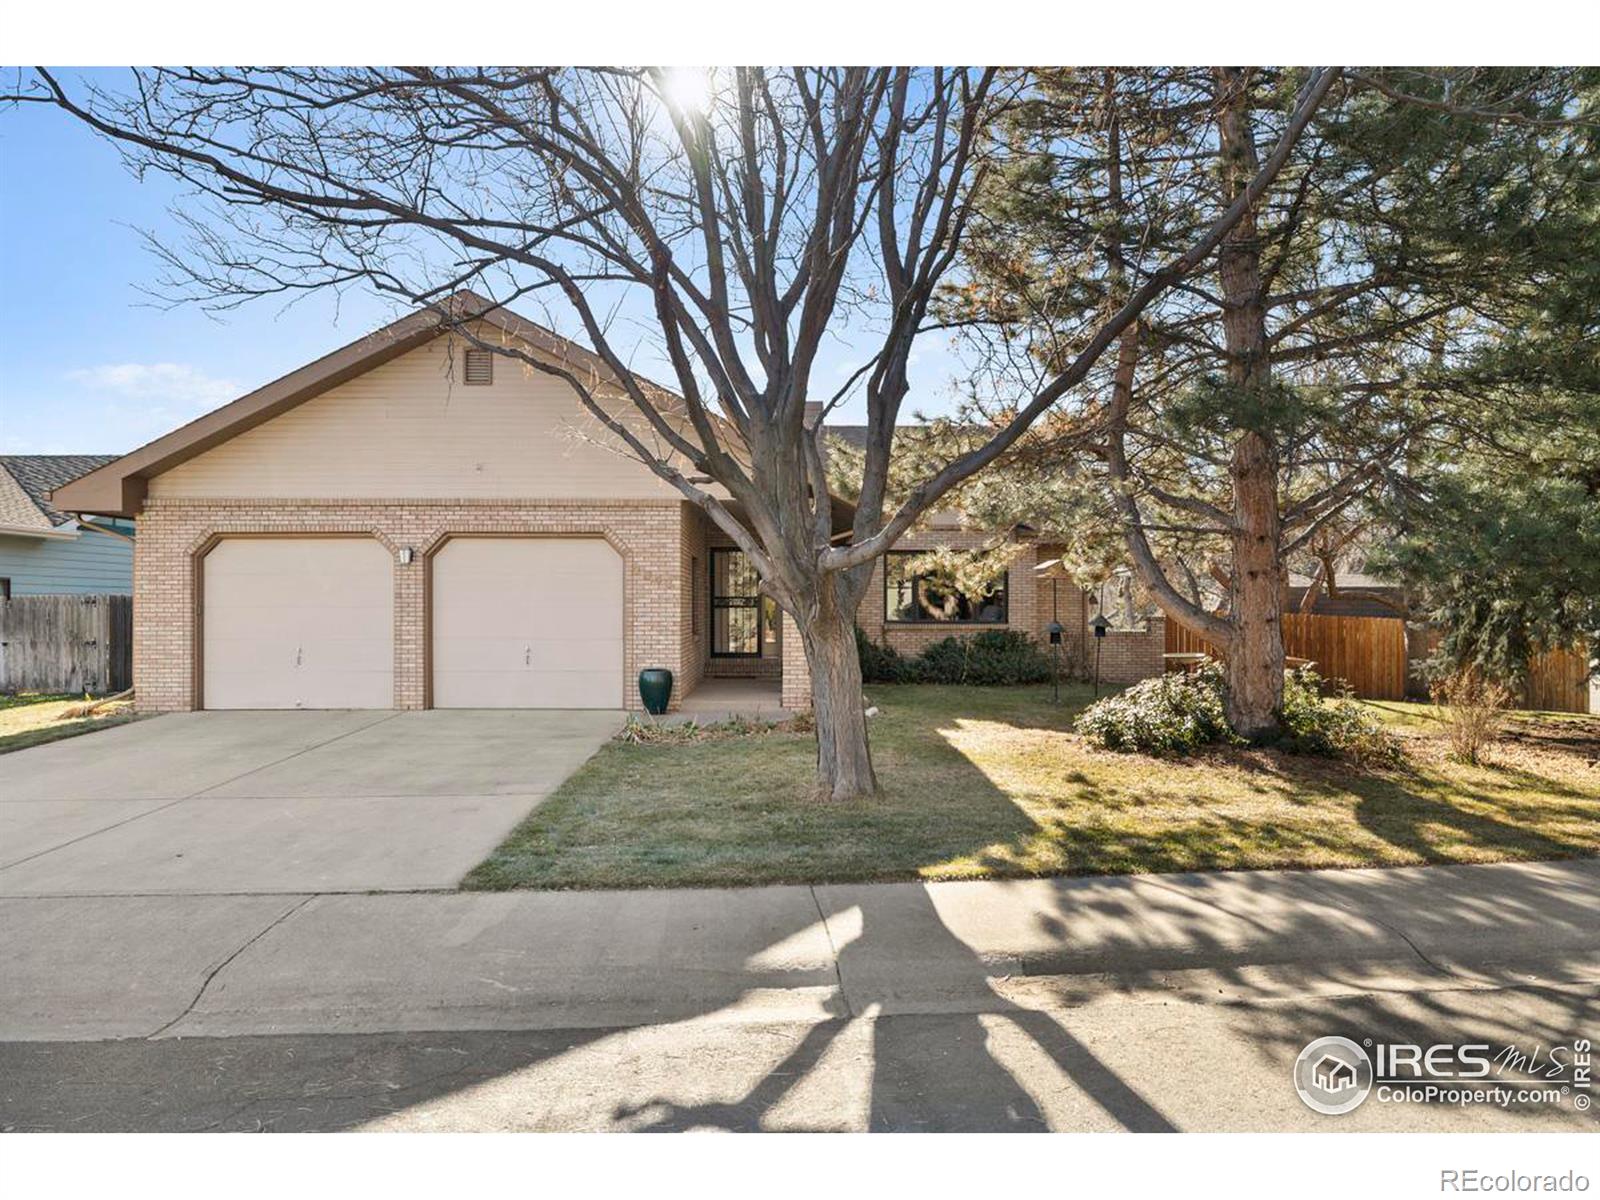 2843  Seccomb Street, fort collins MLS: 4567891000901 Beds: 4 Baths: 3 Price: $760,000